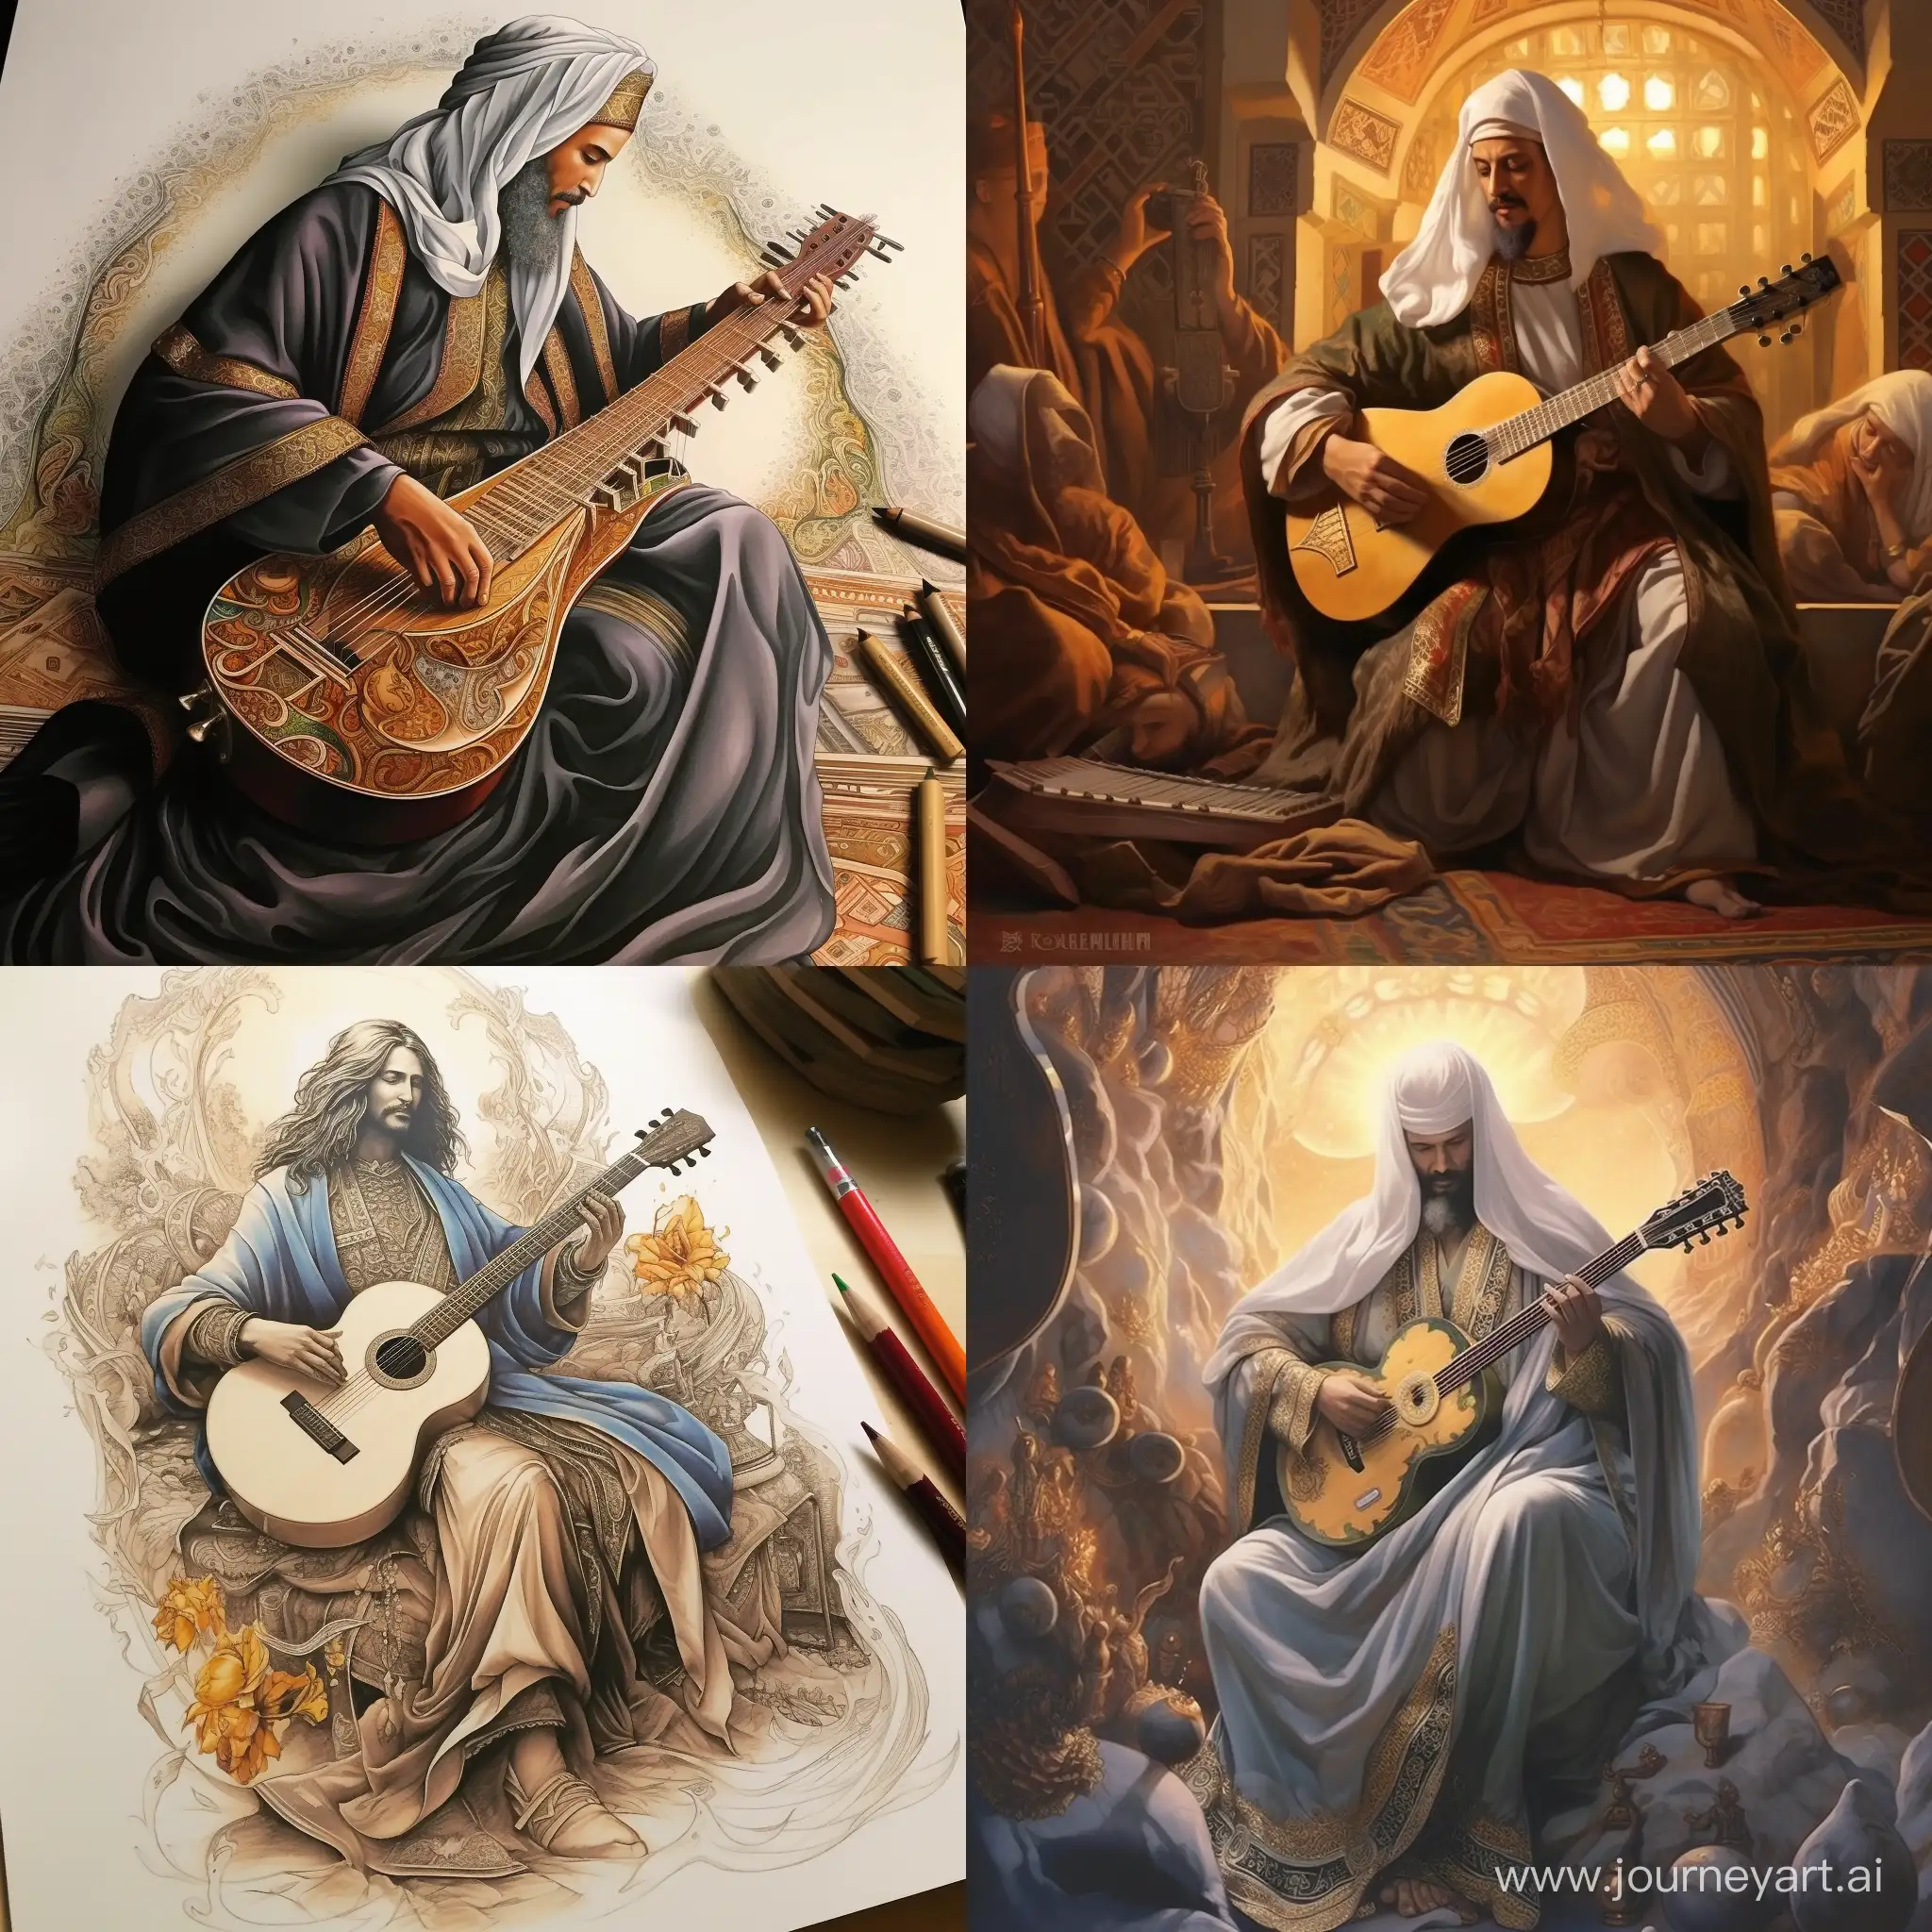 Realistic-Portrait-of-King-Salman-Amidst-Oud-Music-and-Egyptian-Craftsmanship